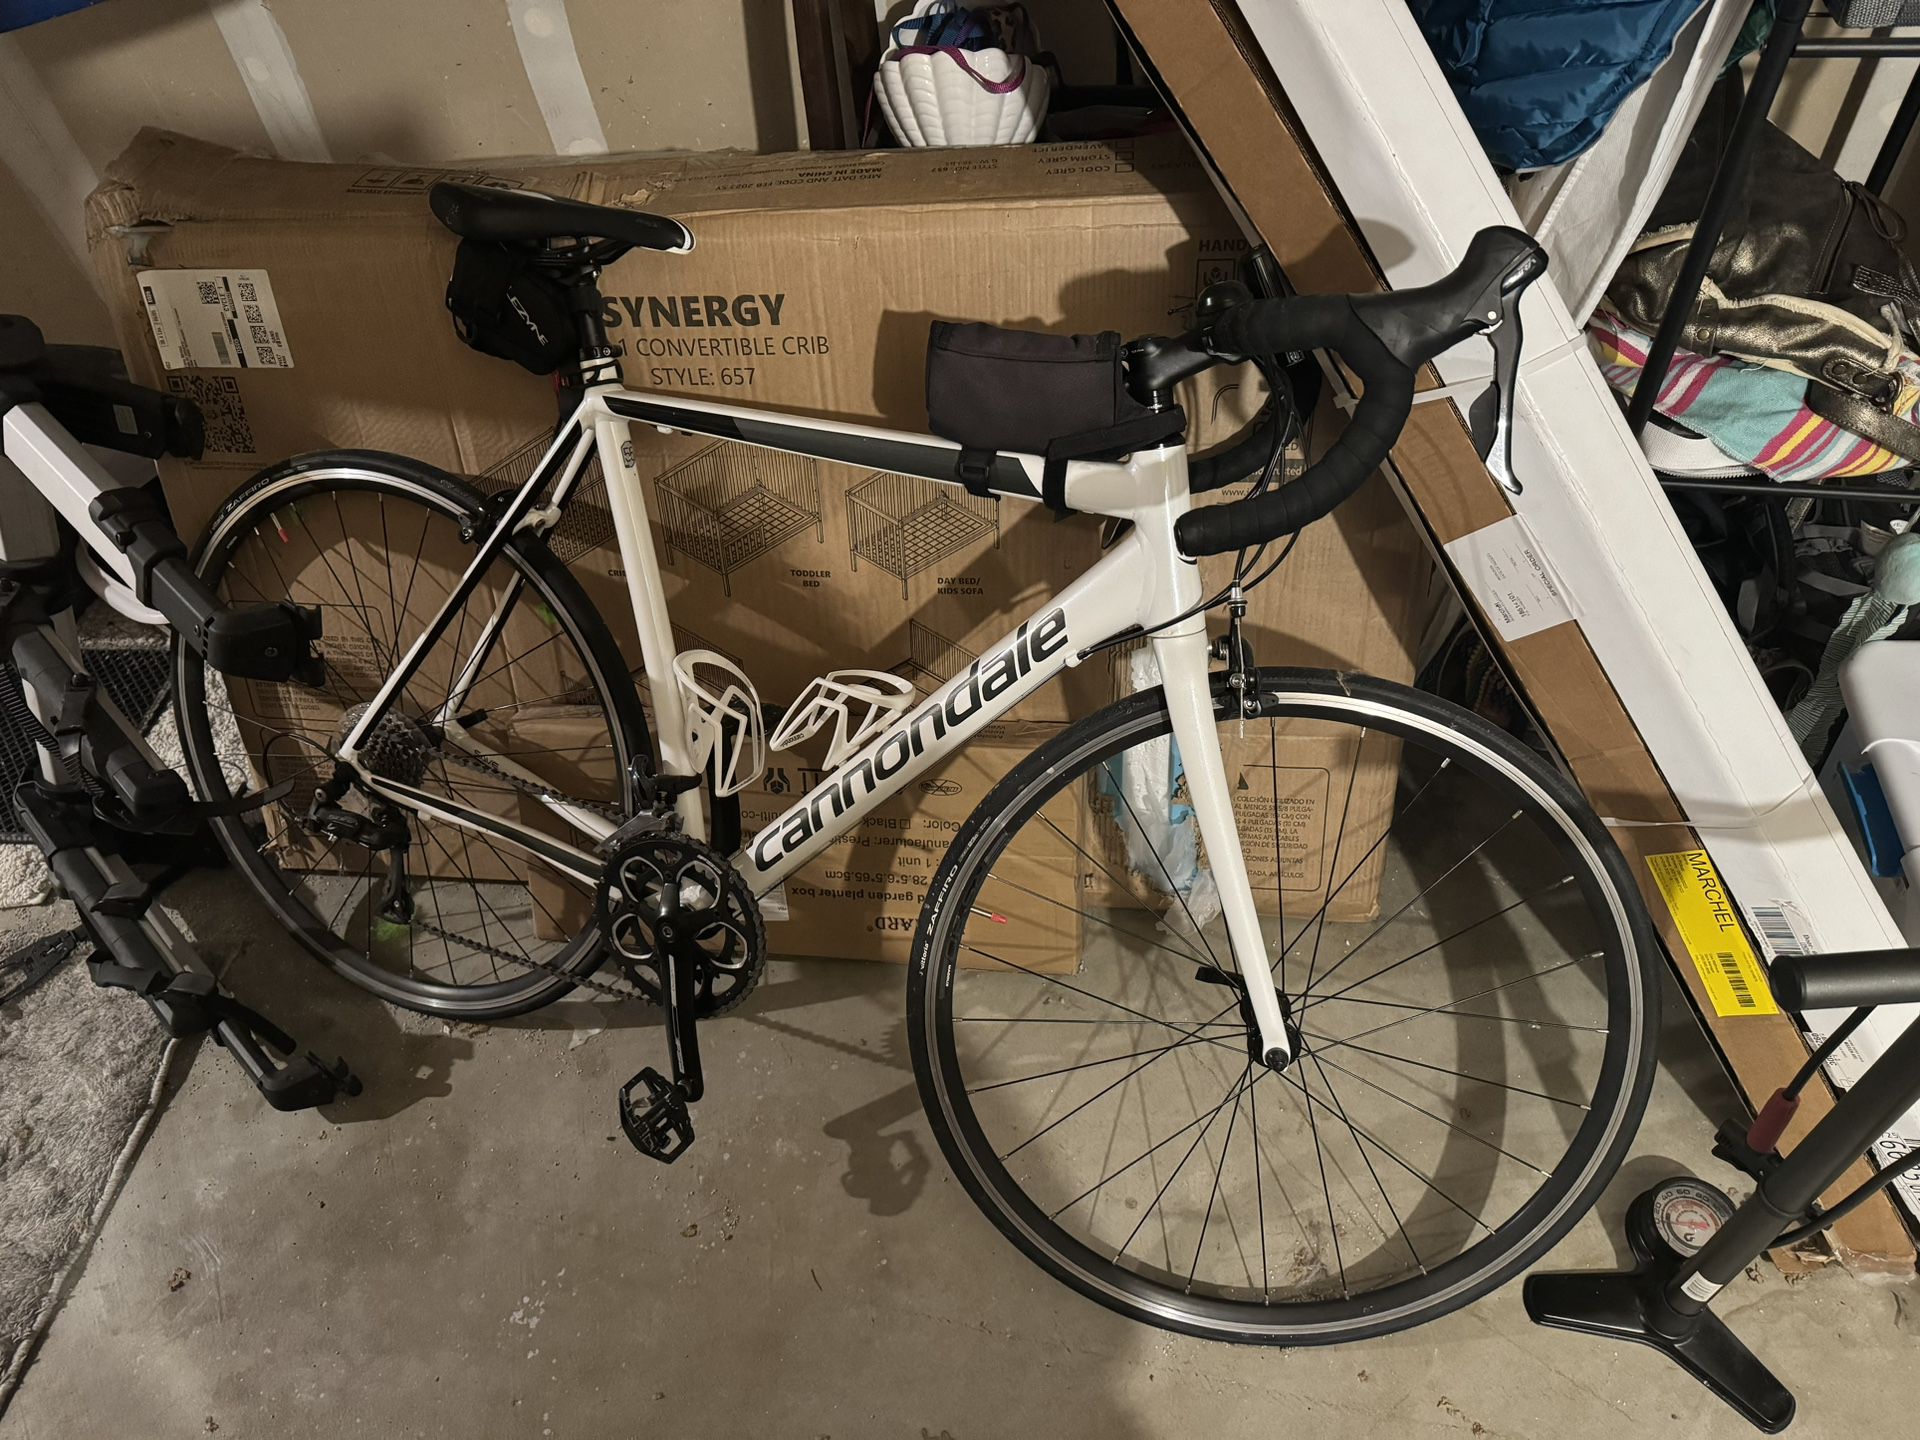 Cannondale Road Bike 56 Cm With Pump And Thule 2 Bike Trunk Rack